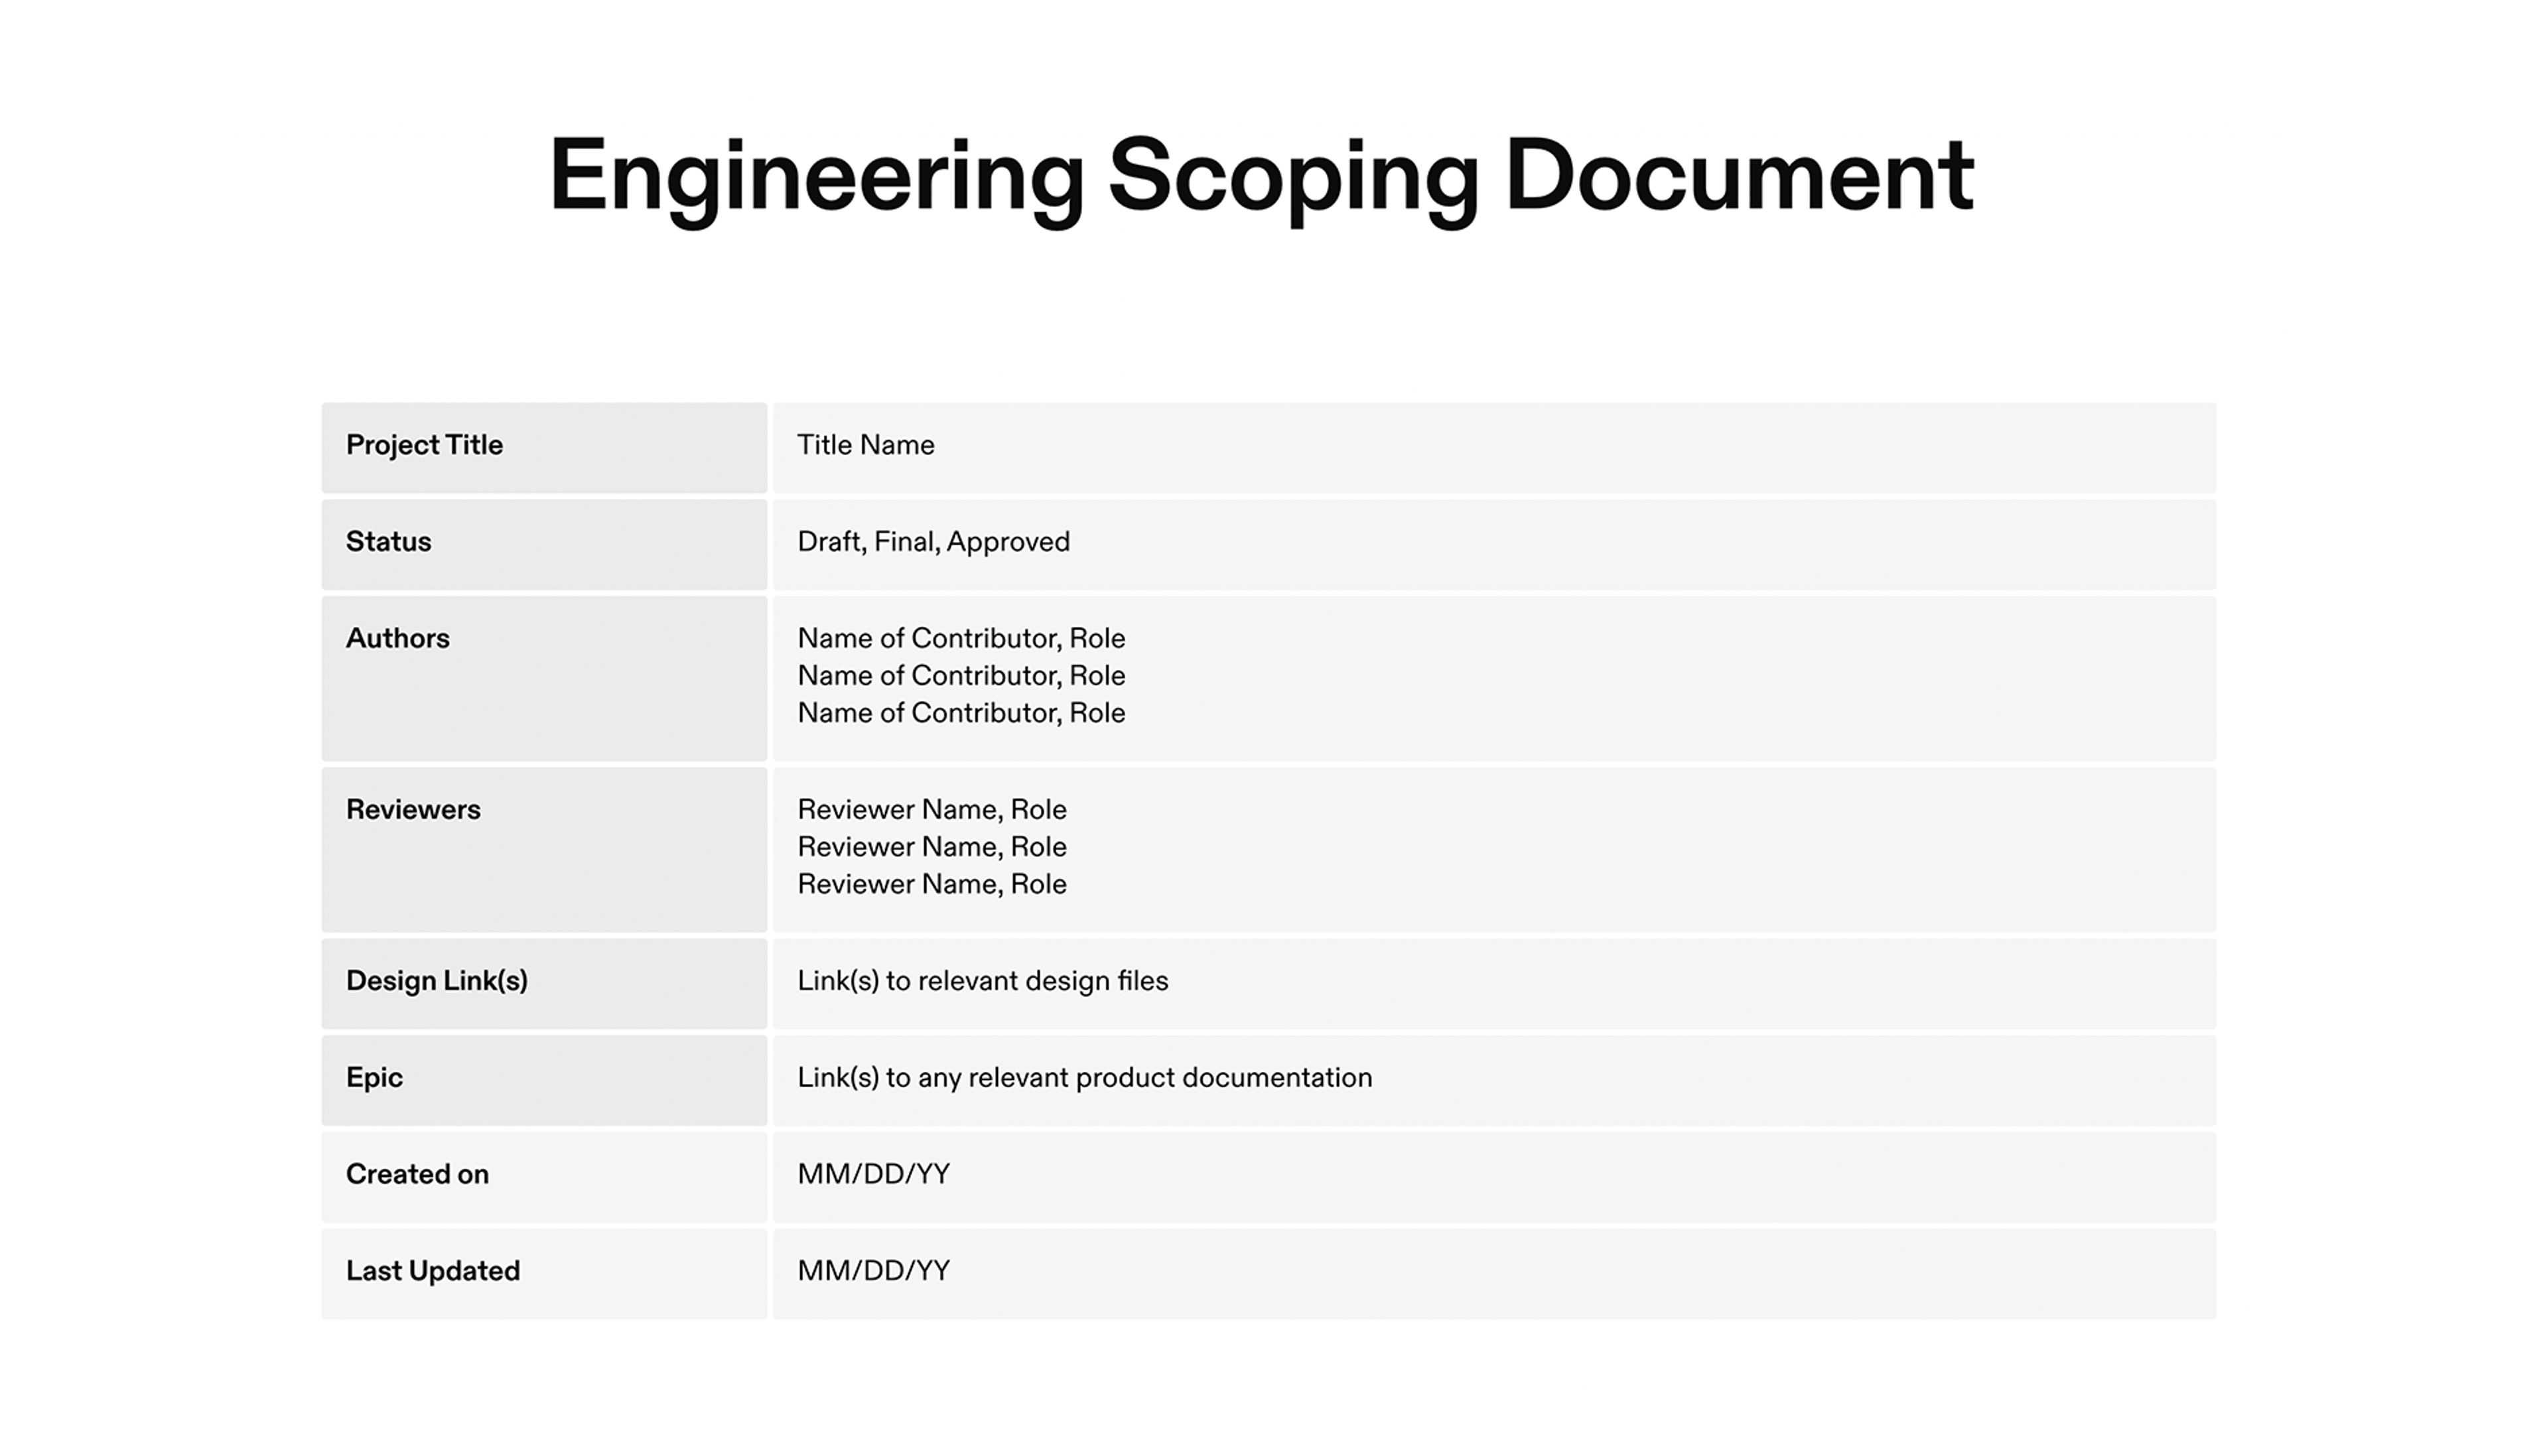 Engineering Scoping Document Template - Overview